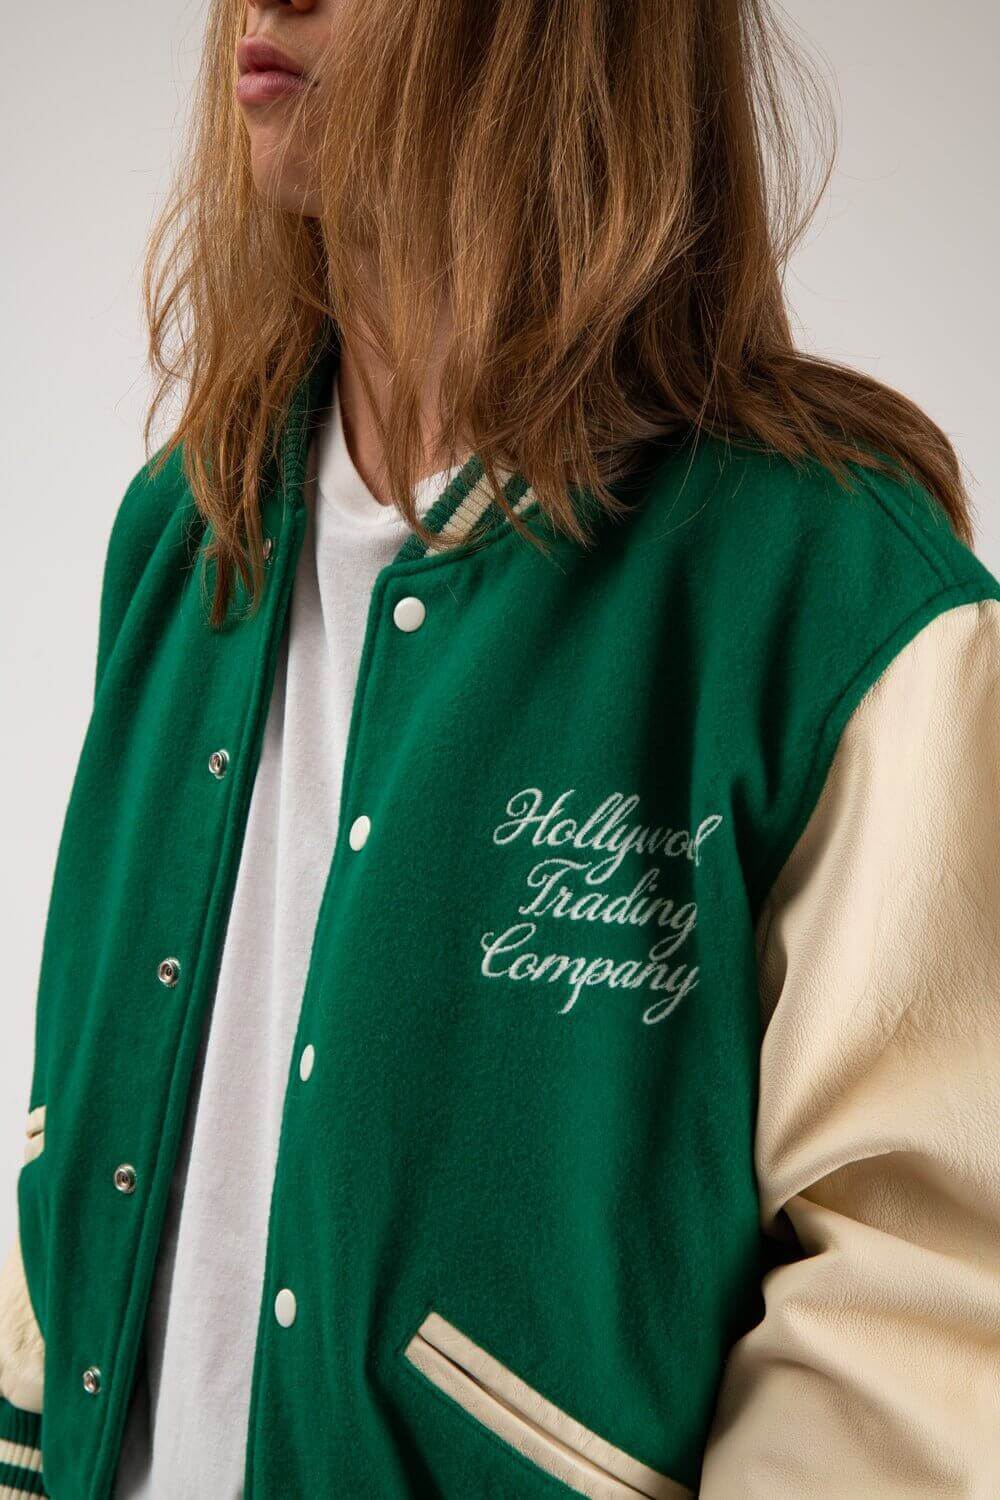 COLLEGE - EMBROIDERY MAN Varsity wool & leather bomber jacket. Front button closure, ribbed collar, cuffs and hem. Embroidered details. Two side pockets. Main body composition: 70% Wool, 30% Acrylic; sleeves: 100% Leather HTC LOS ANGELES